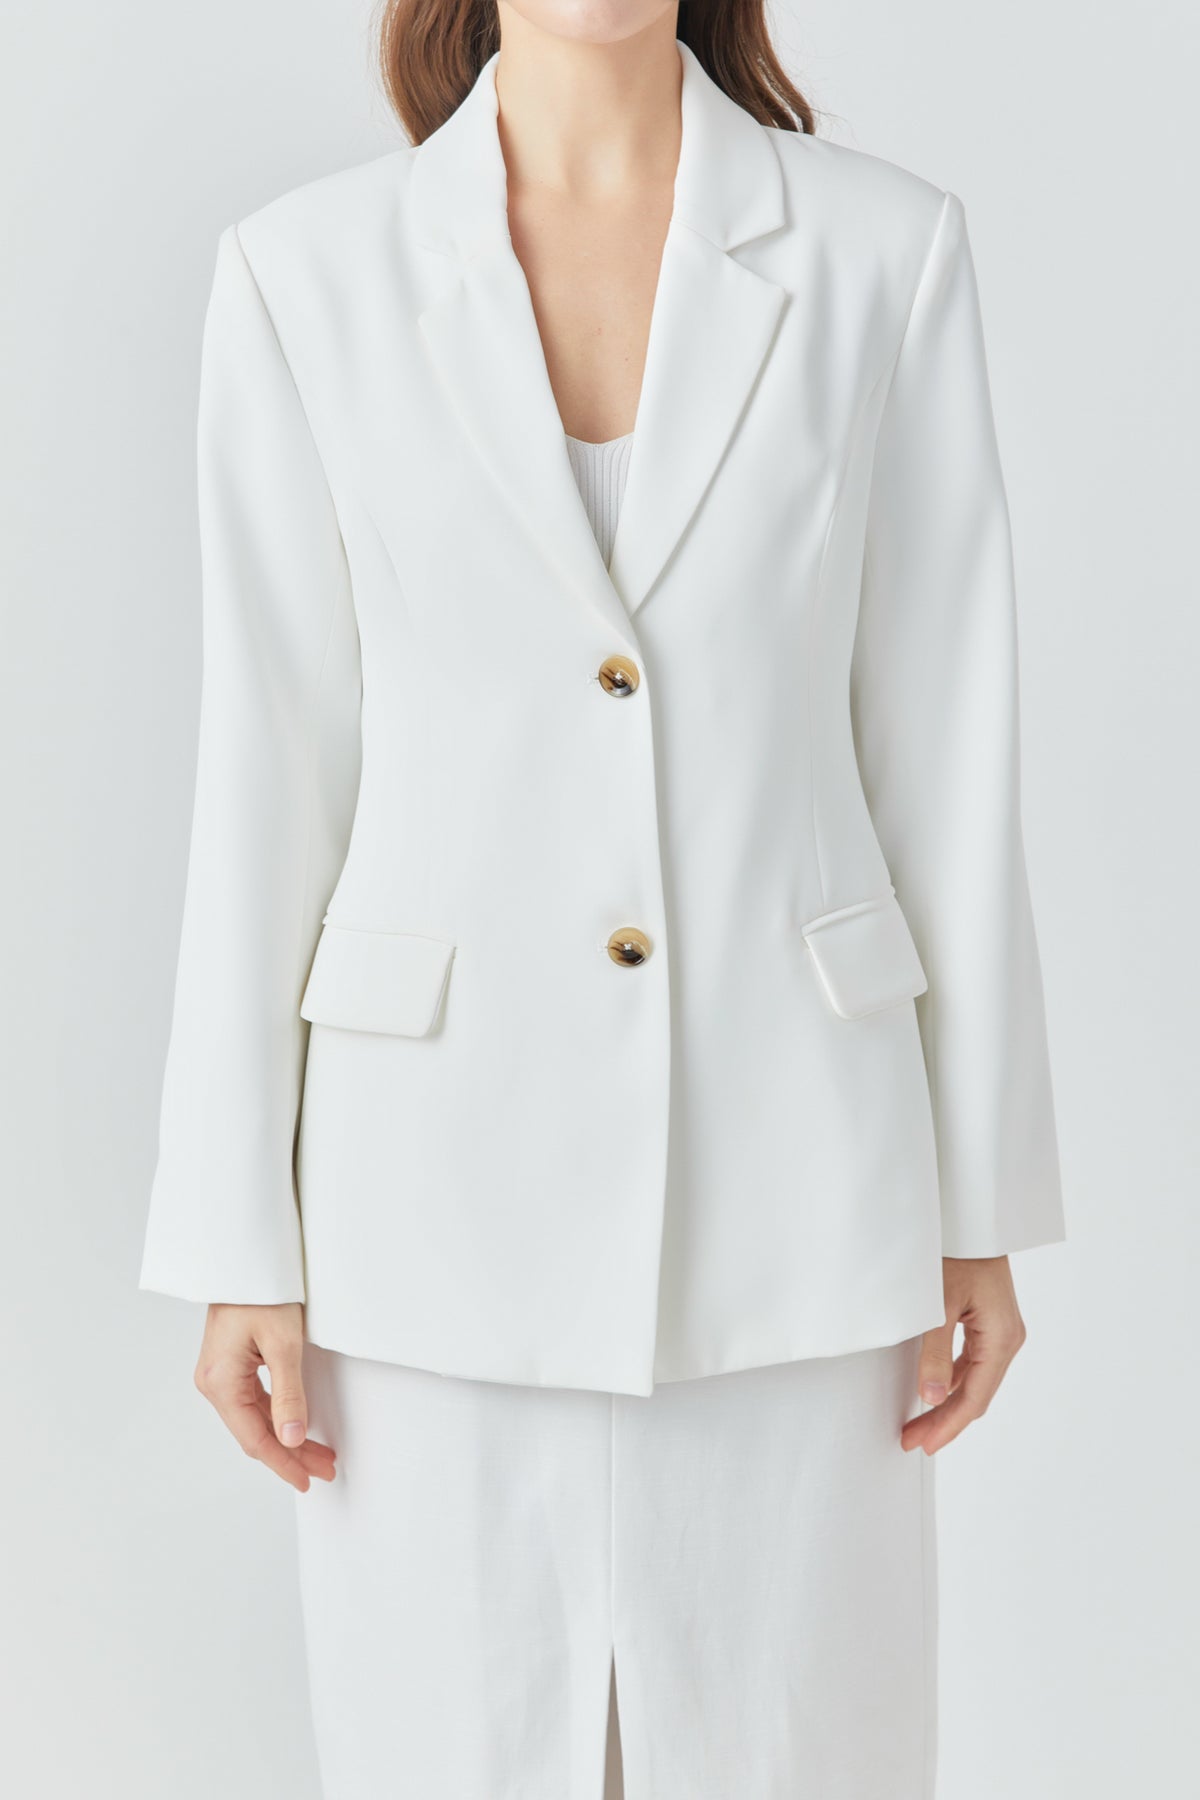 ENDLESS ROSE - Solid 3 Button Blazer - BLAZERS available at Objectrare